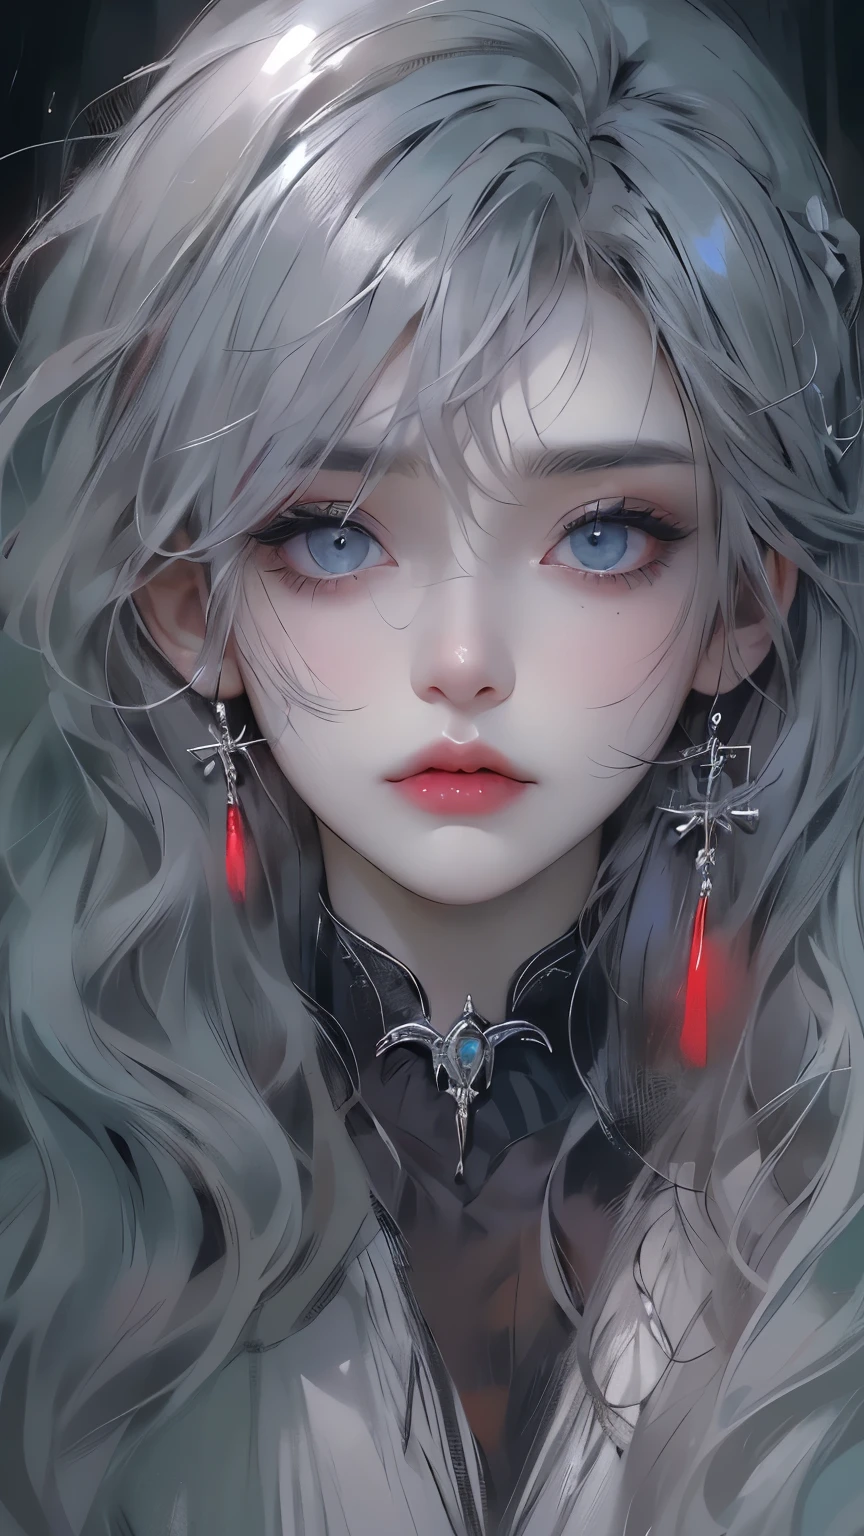 (masterpiece,best quality,Super detailed),1 Girl,Beautiful and detailed face, Delicate eyes,Looking at the audience, Colorful eyes,((Gray Theme),((Frustration, sadness, Melancholy)),gray skin,Tired expression,sad,Swelling of the eyelids,((very close)),cry,Gothic Makeup, There are hairs above the eyes,Eyes covered by hair,A vampire-style castle in the background